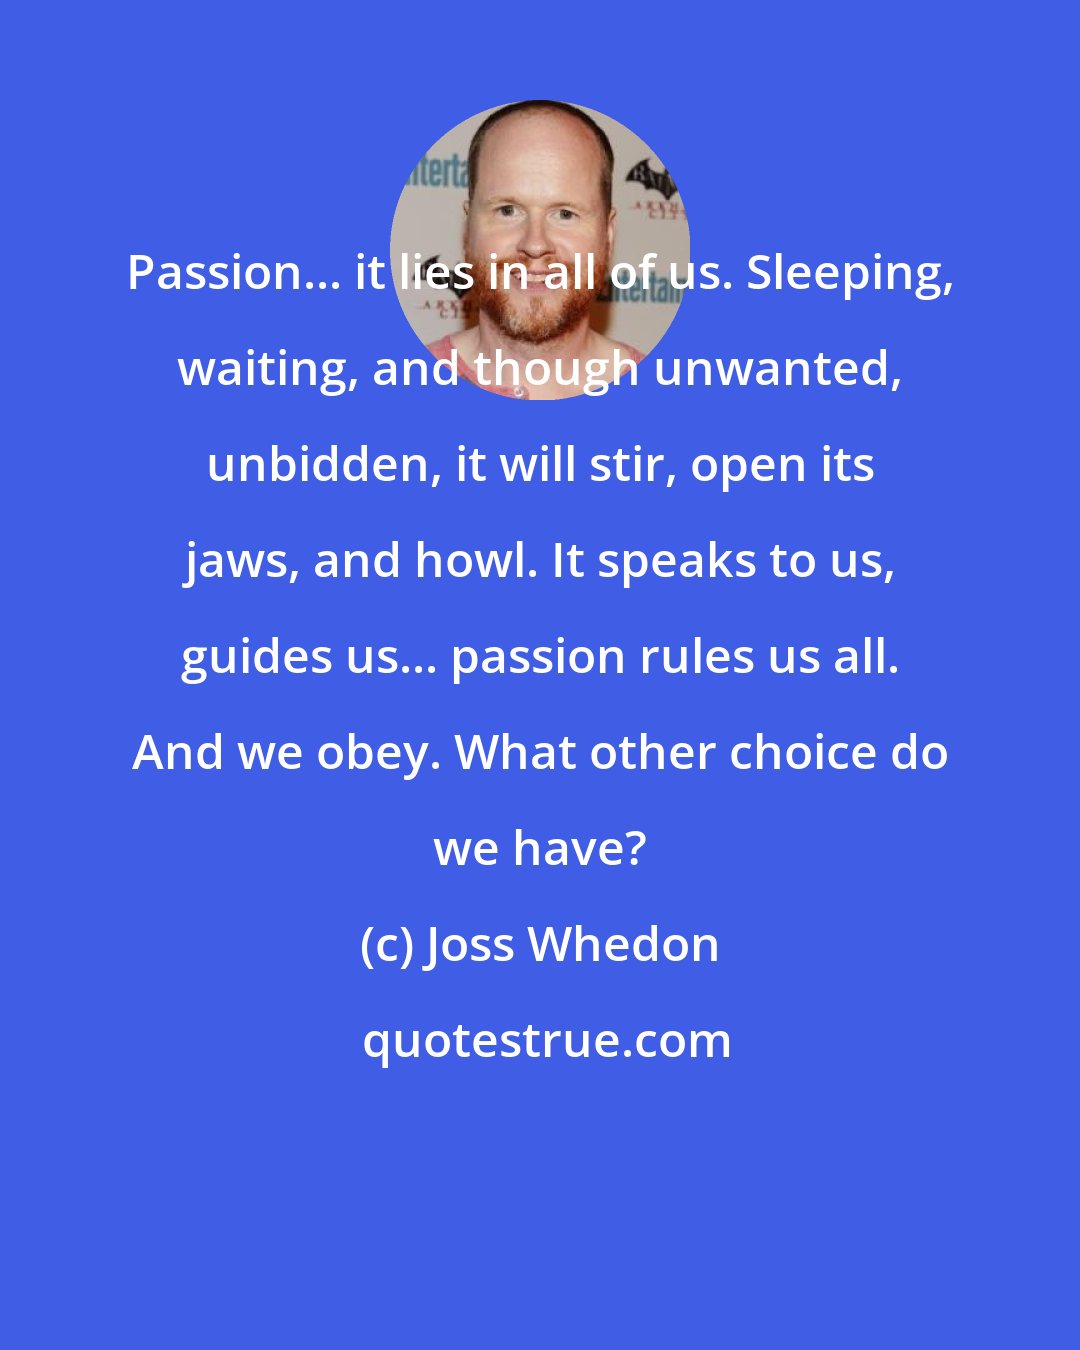 Joss Whedon: Passion... it lies in all of us. Sleeping, waiting, and though unwanted, unbidden, it will stir, open its jaws, and howl. It speaks to us, guides us... passion rules us all. And we obey. What other choice do we have?